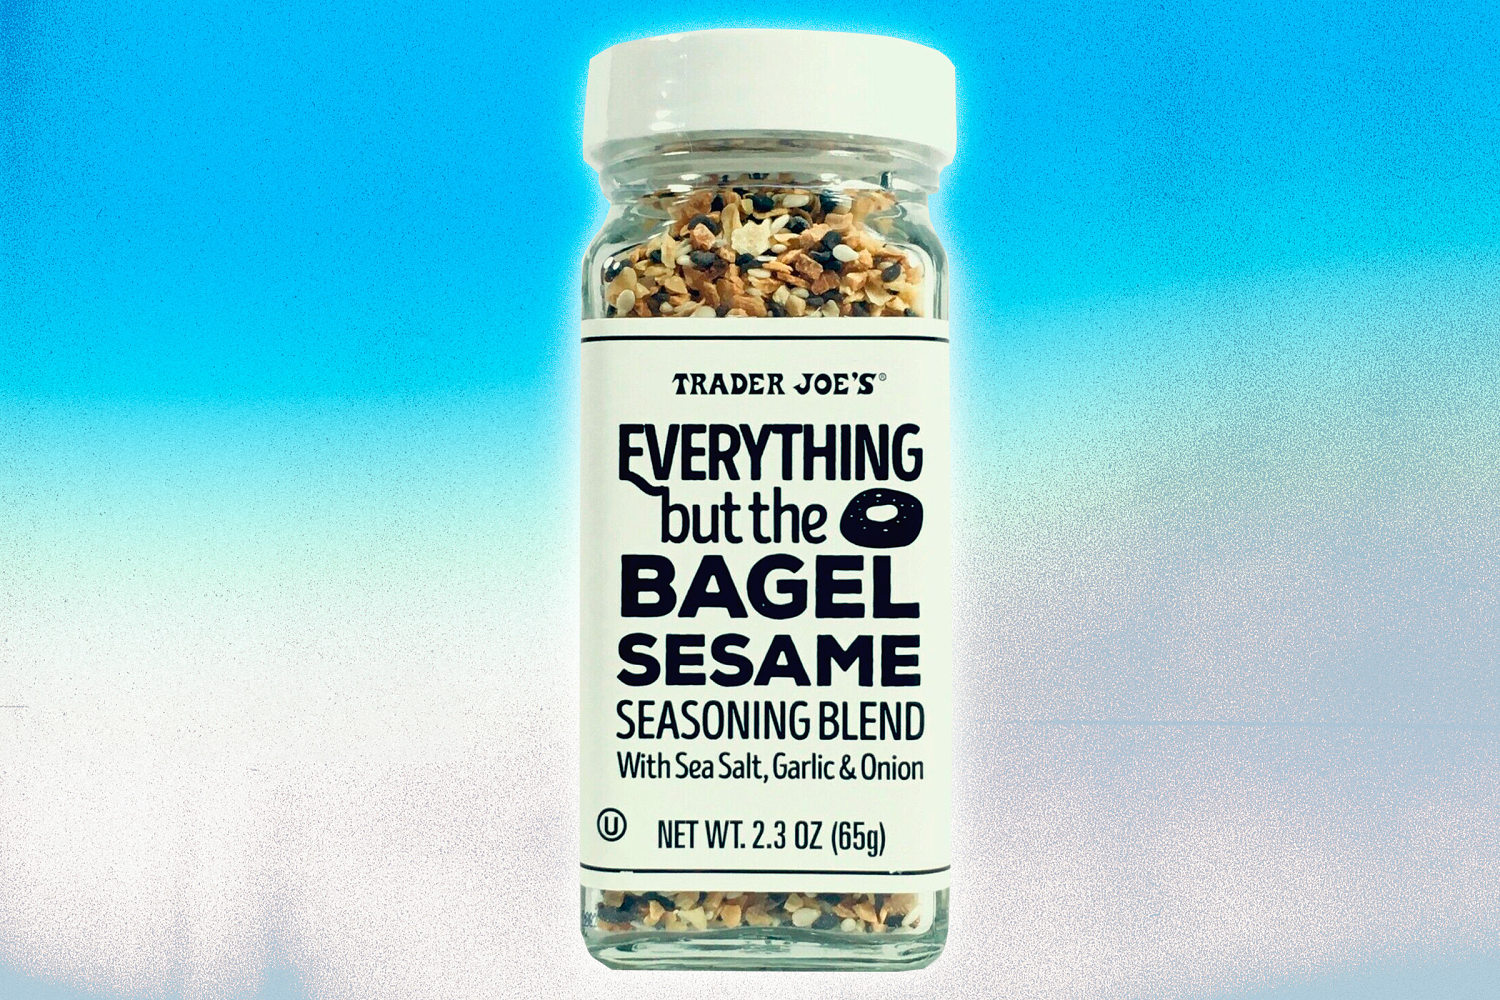 Trader Joe's ‘Everything But the Bagel’ is being confiscated at the airport in Korea